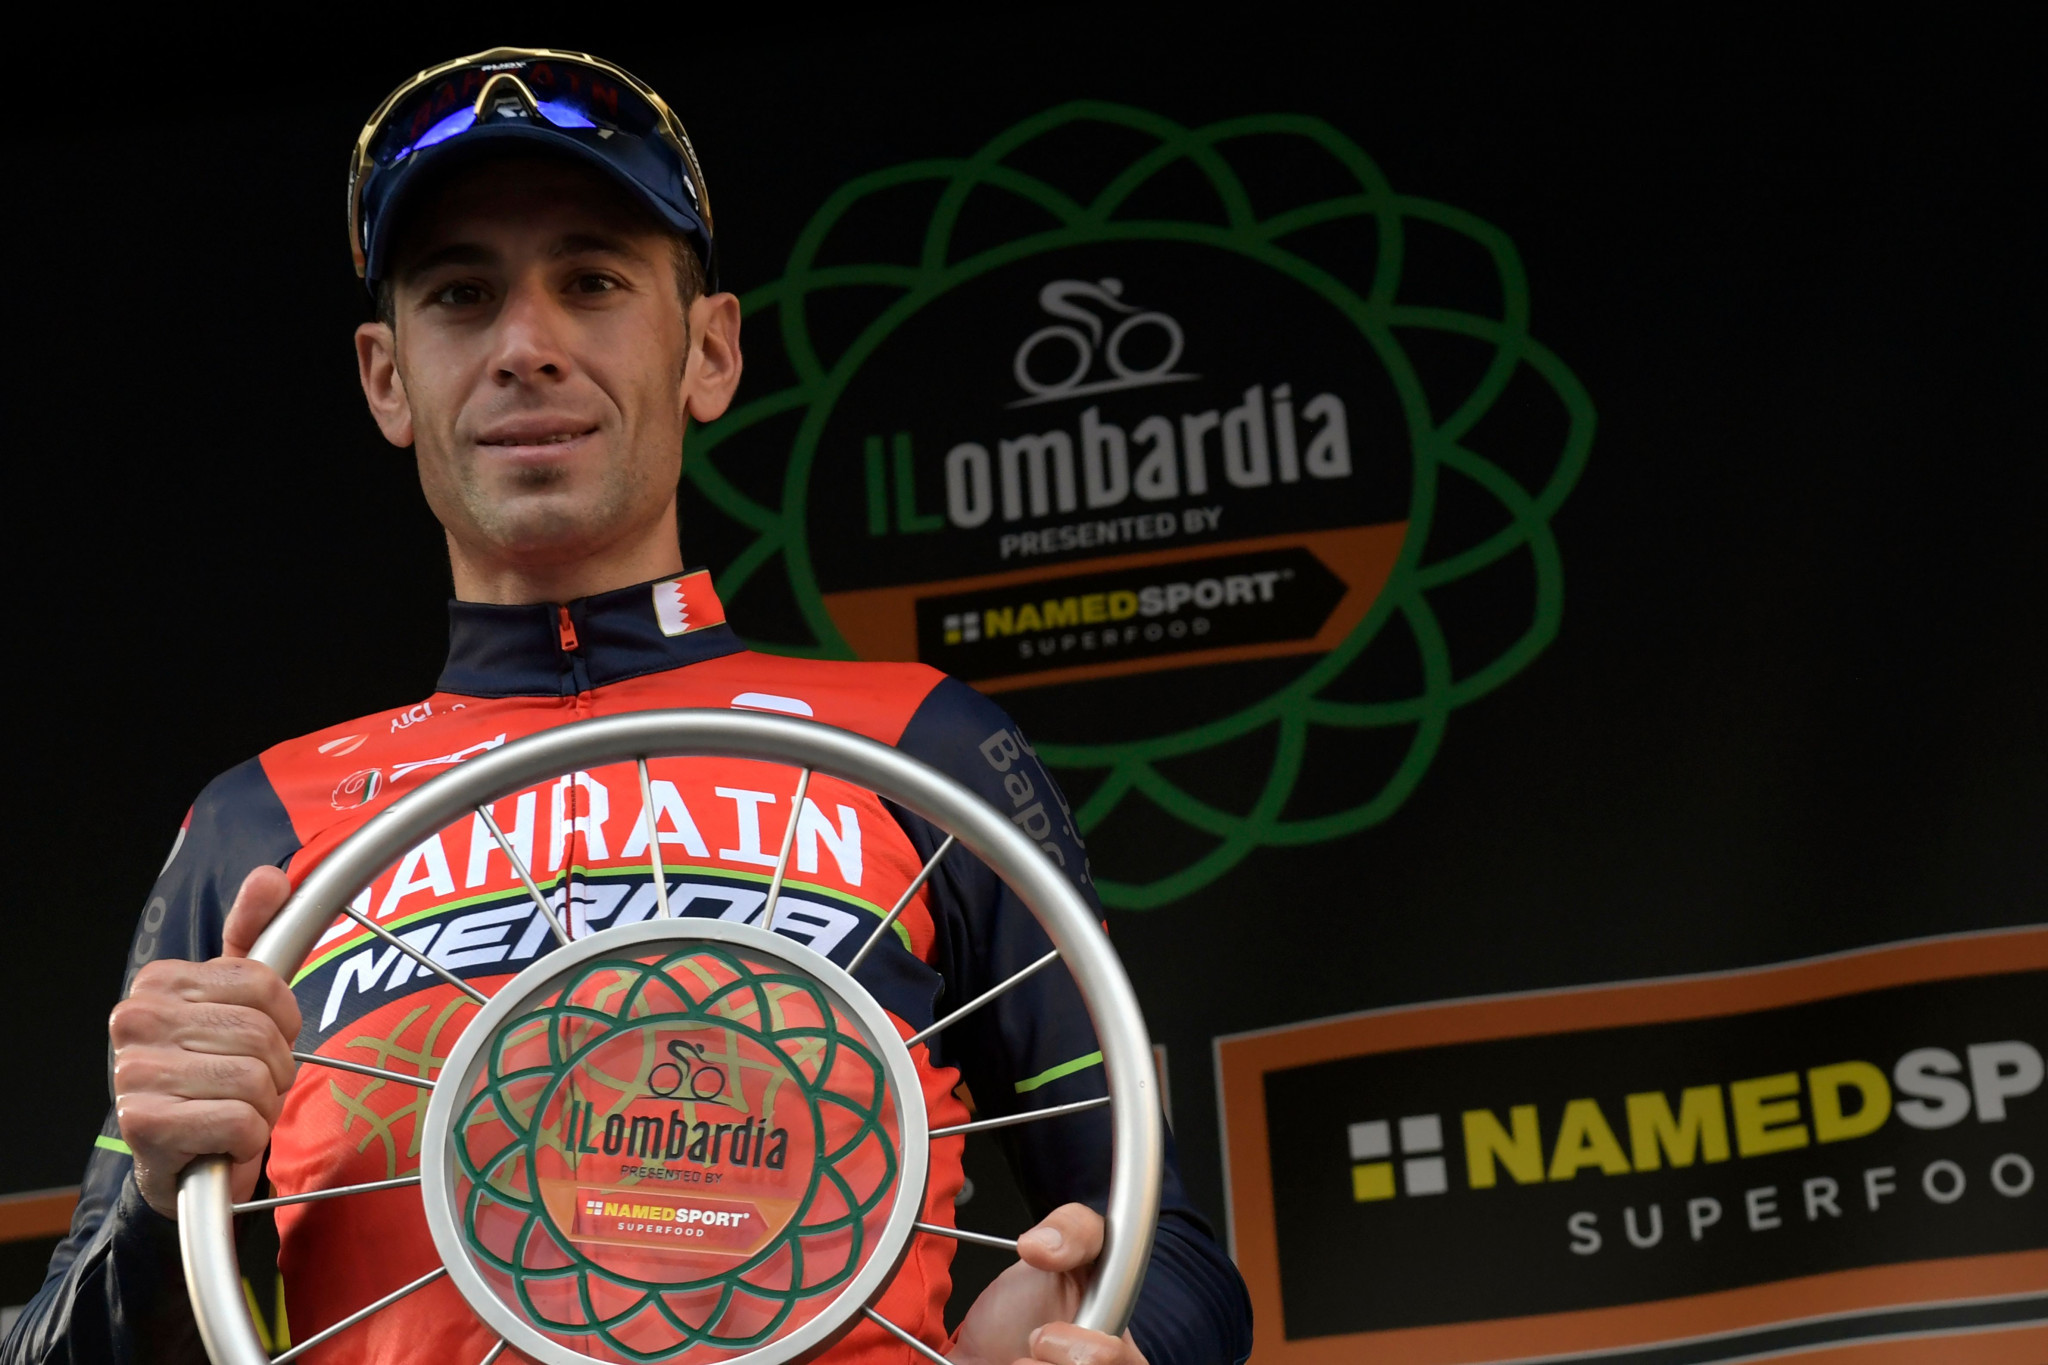 Vincenzo Nibali says he is not interested in inheriting the Vuelta title ©Getty Images